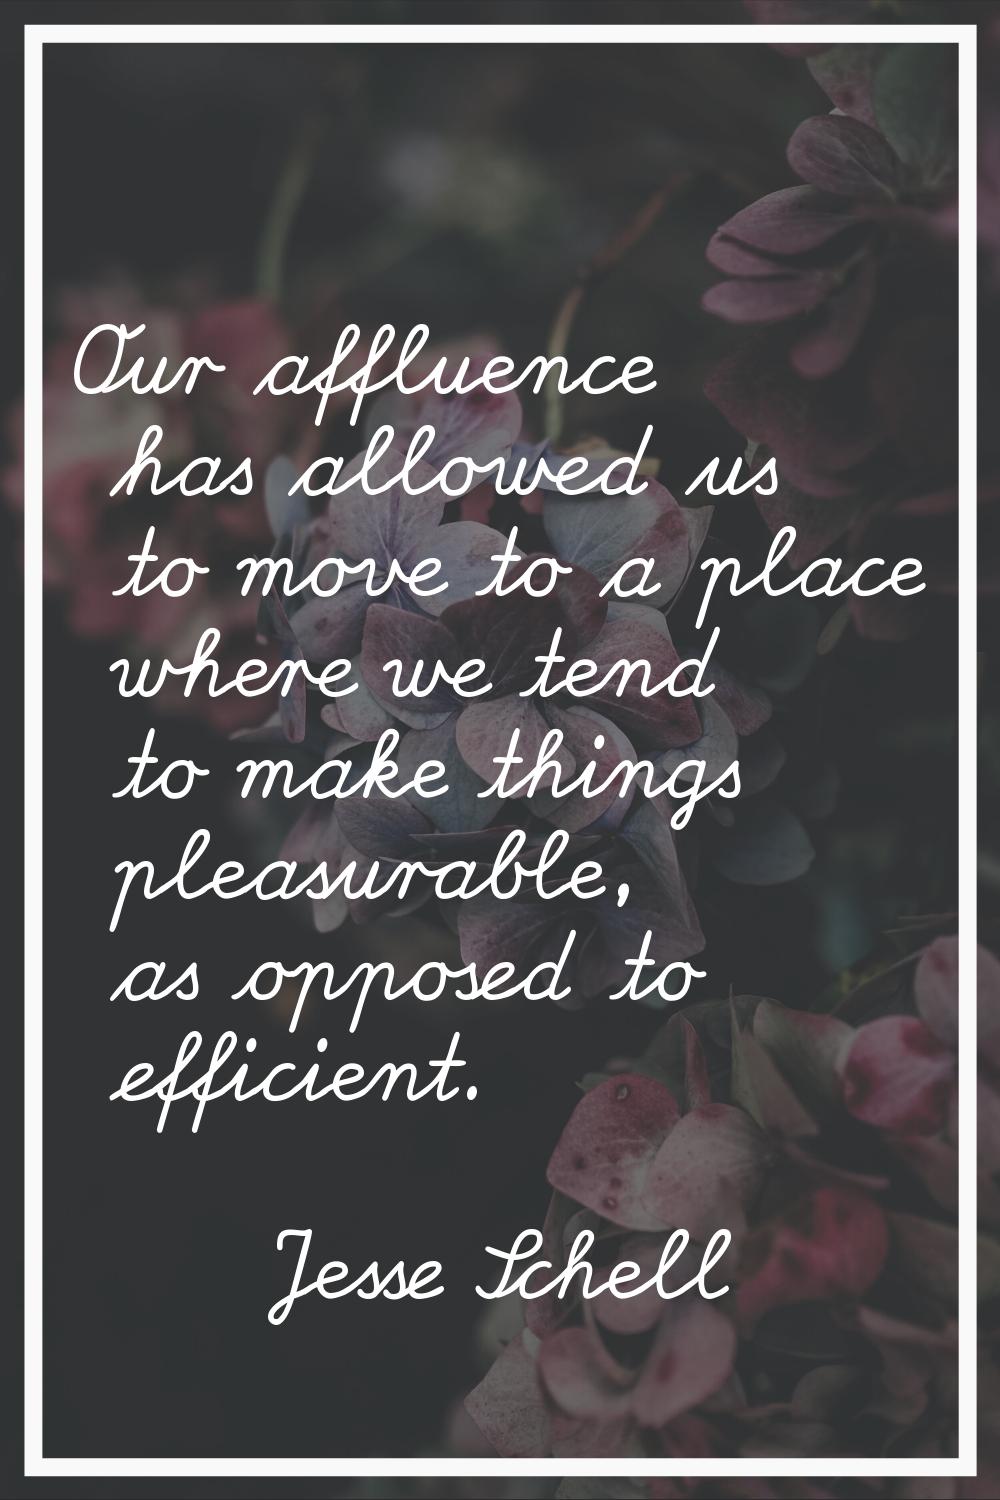 Our affluence has allowed us to move to a place where we tend to make things pleasurable, as oppose